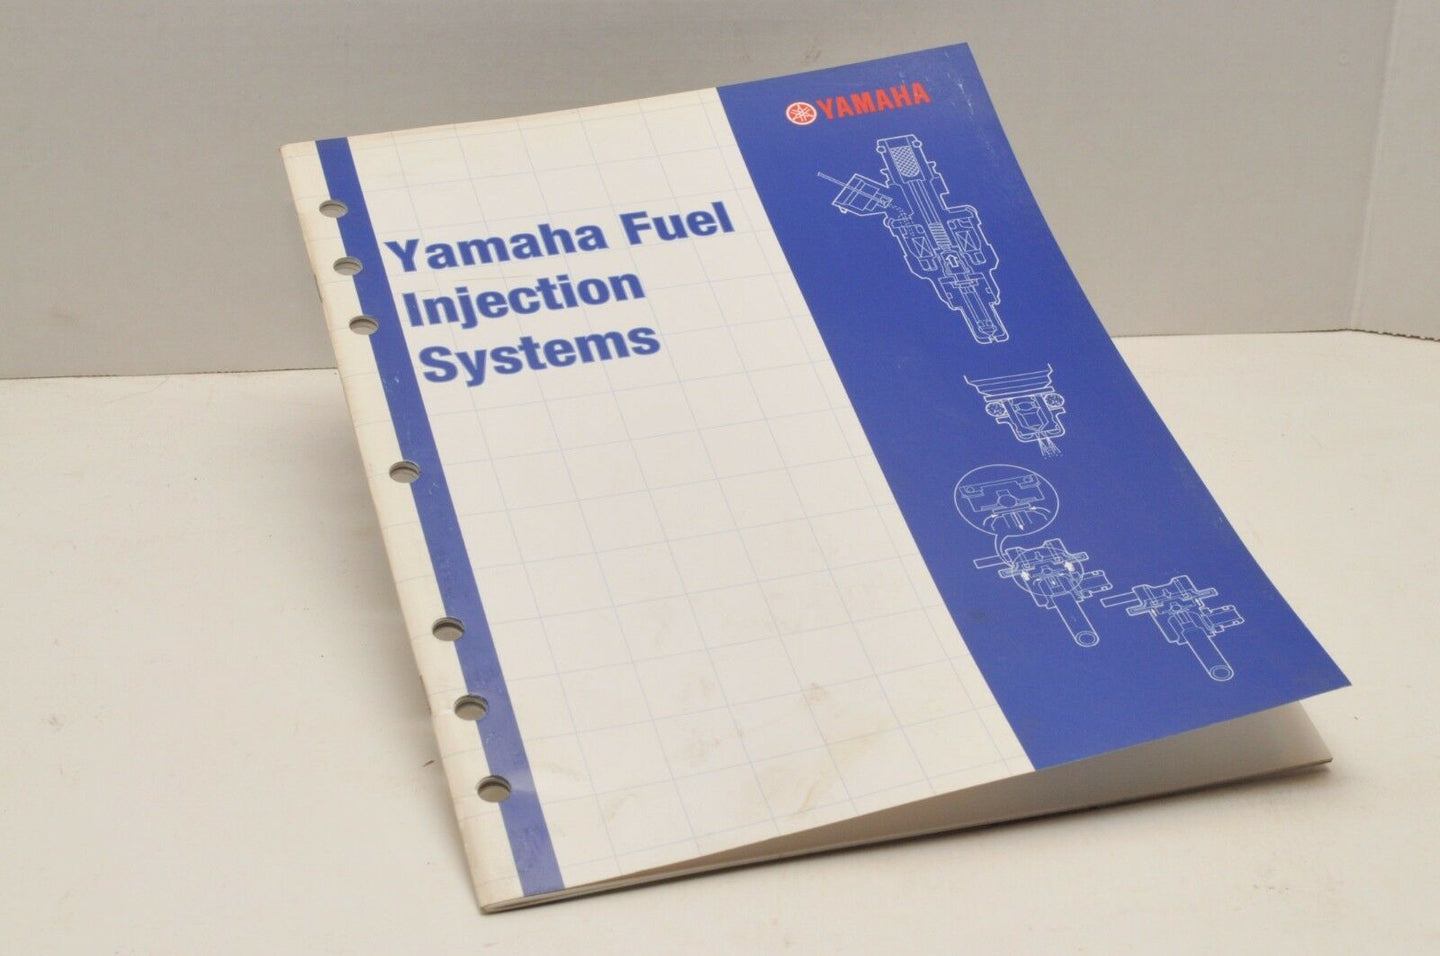 Genuine YAMAHA FUEL INJECTION SYSTEMS BOOK+DISC DVD-10660-00-33 PUB.2009